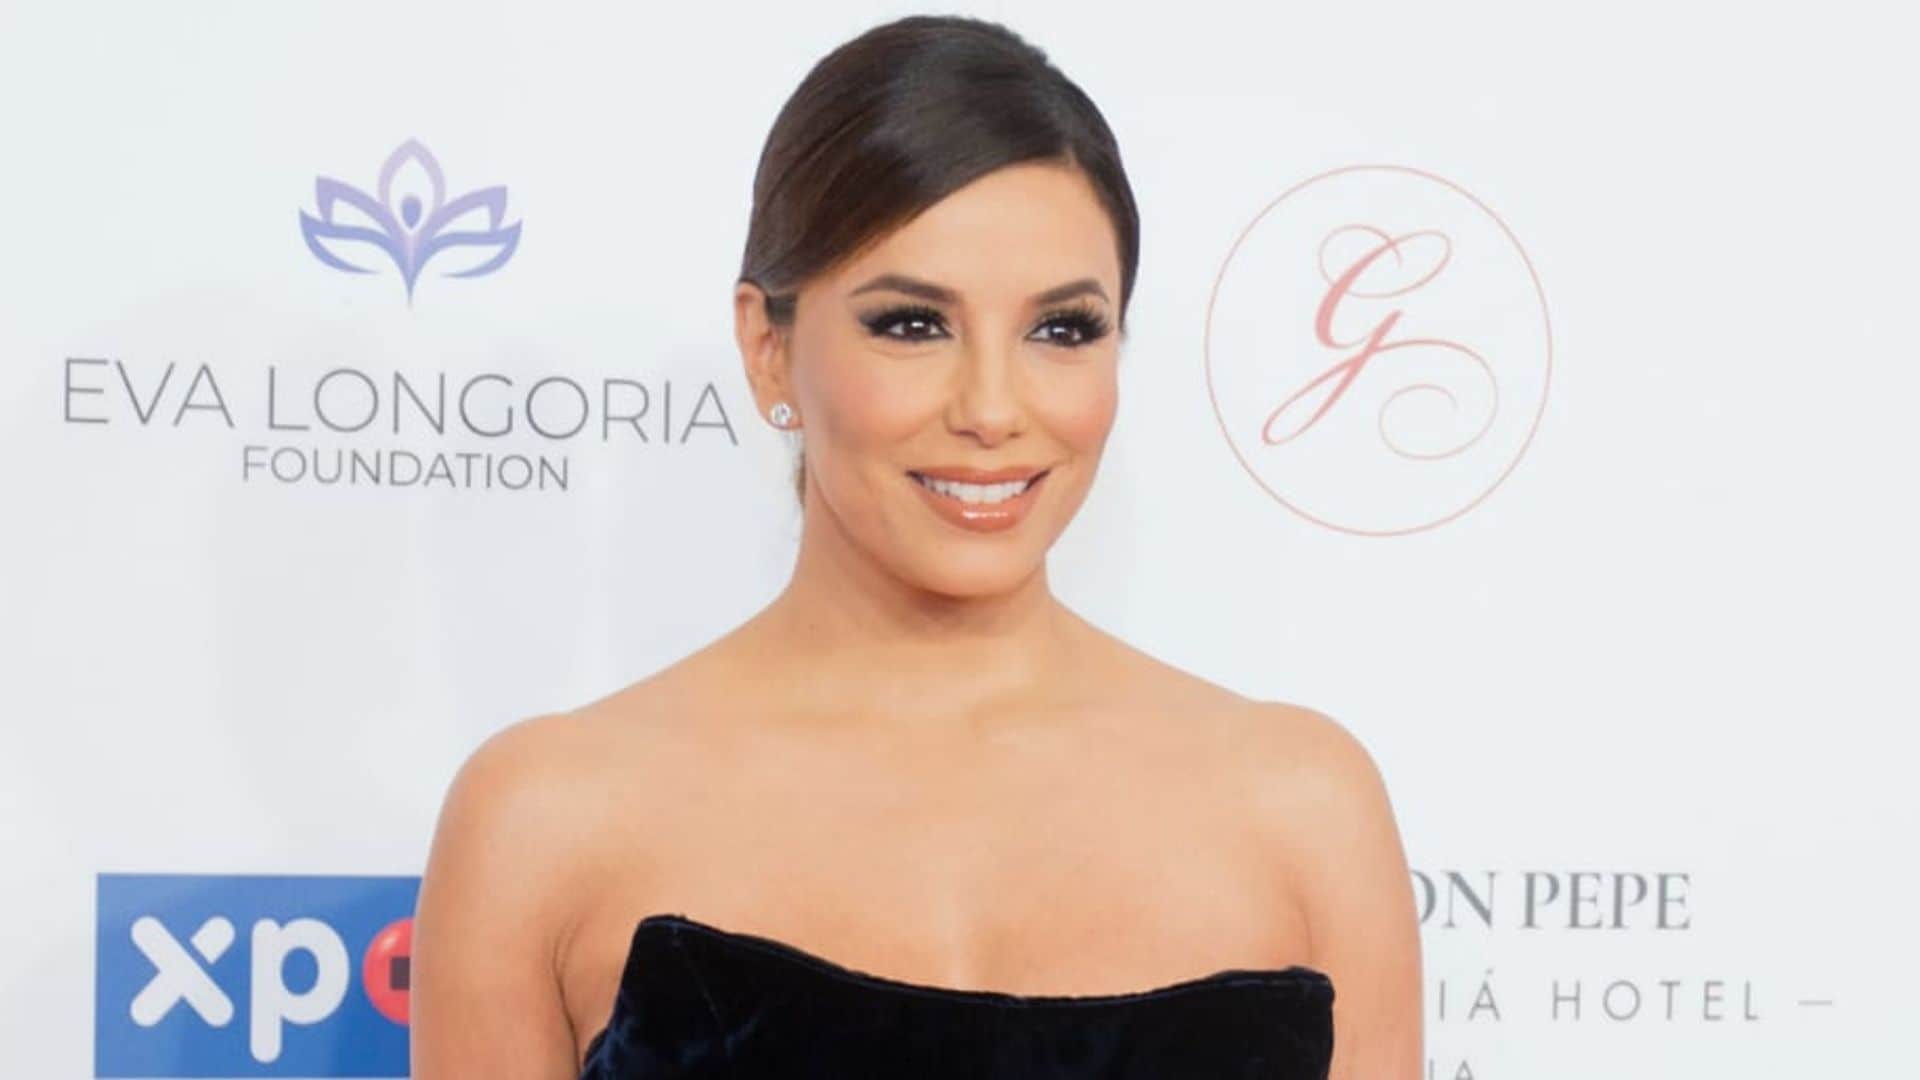 Eva Longoria is belle of the ball in Meghan Markle-approved glamour